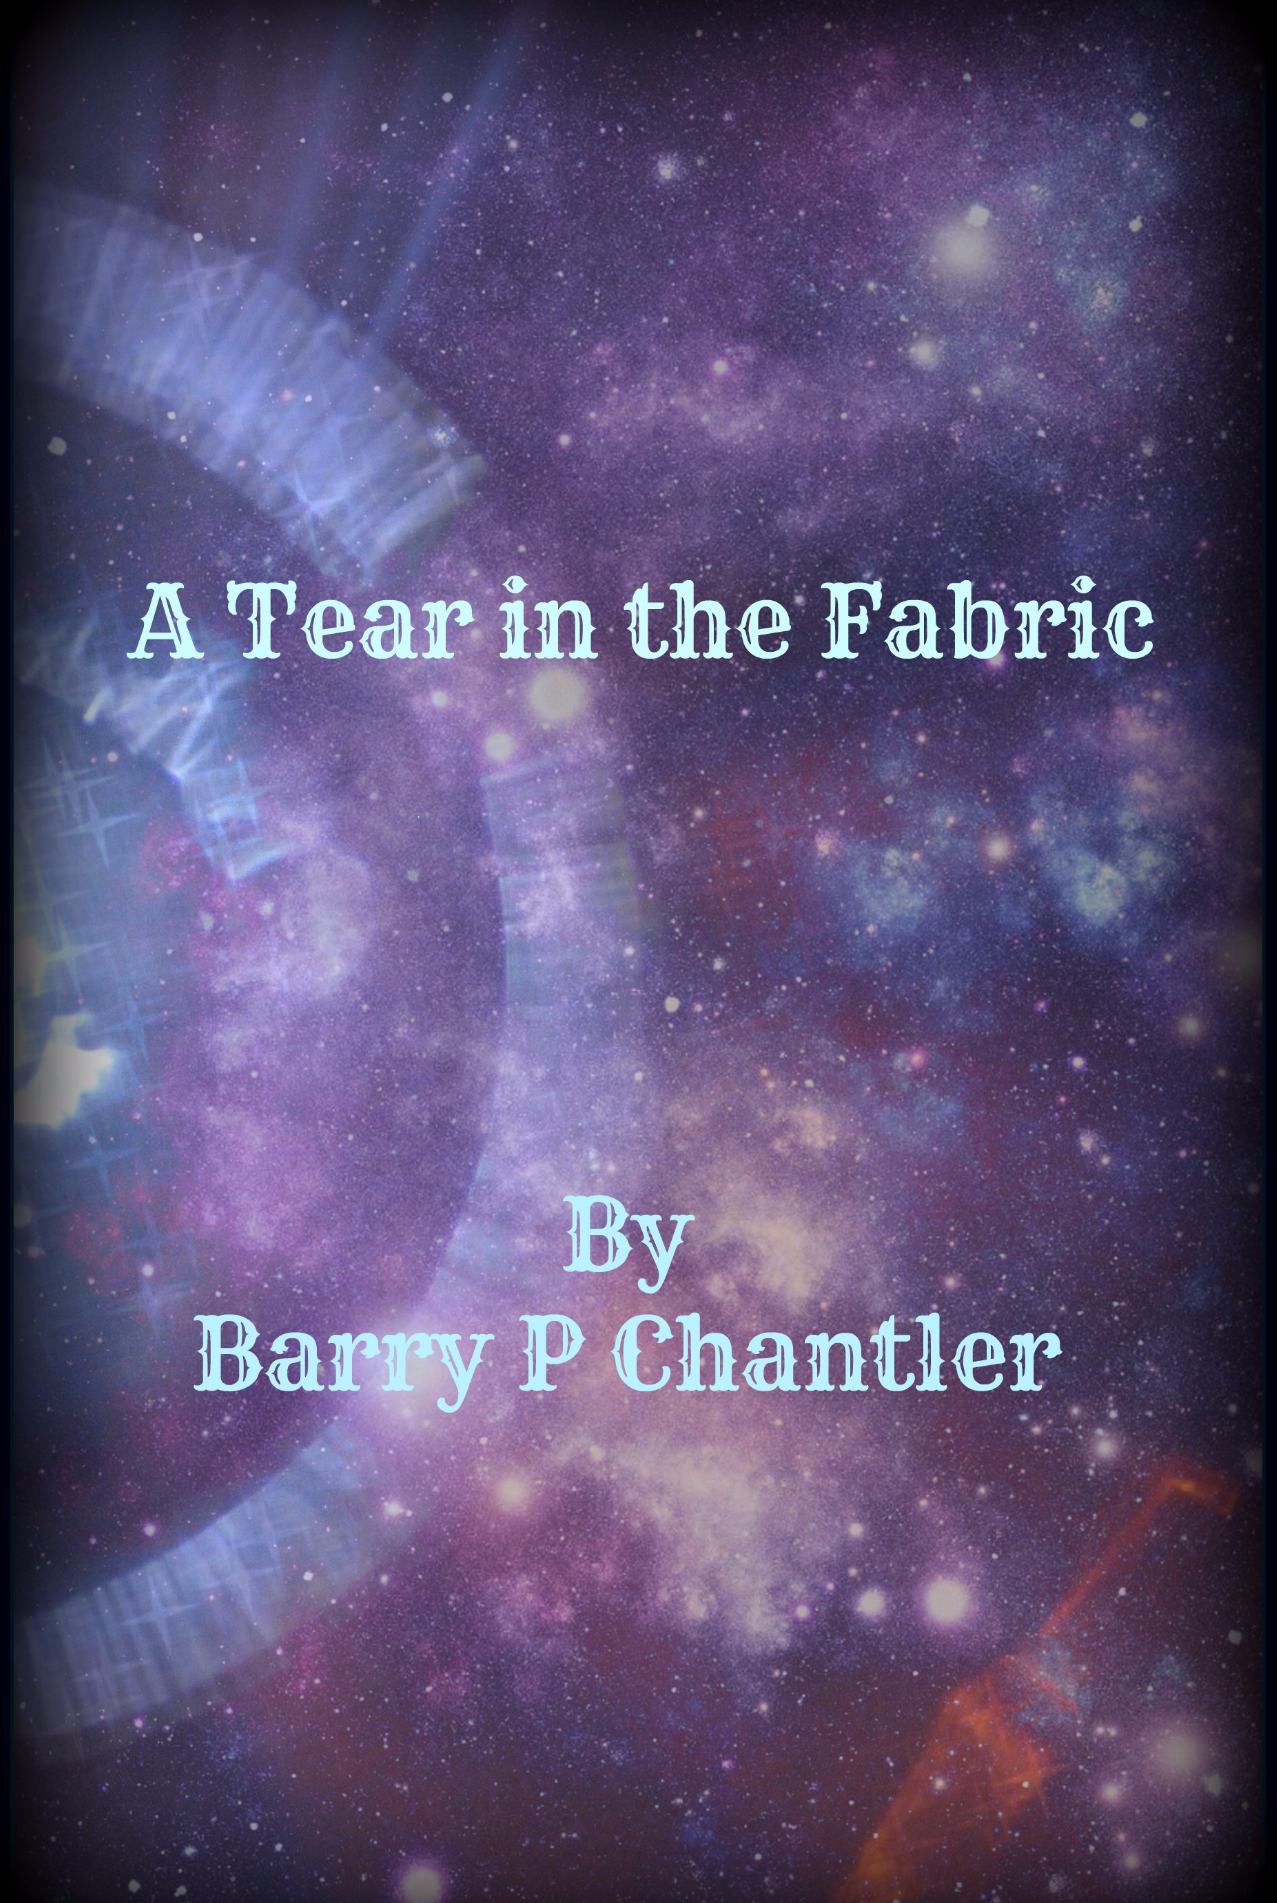 A tear in the Fabric